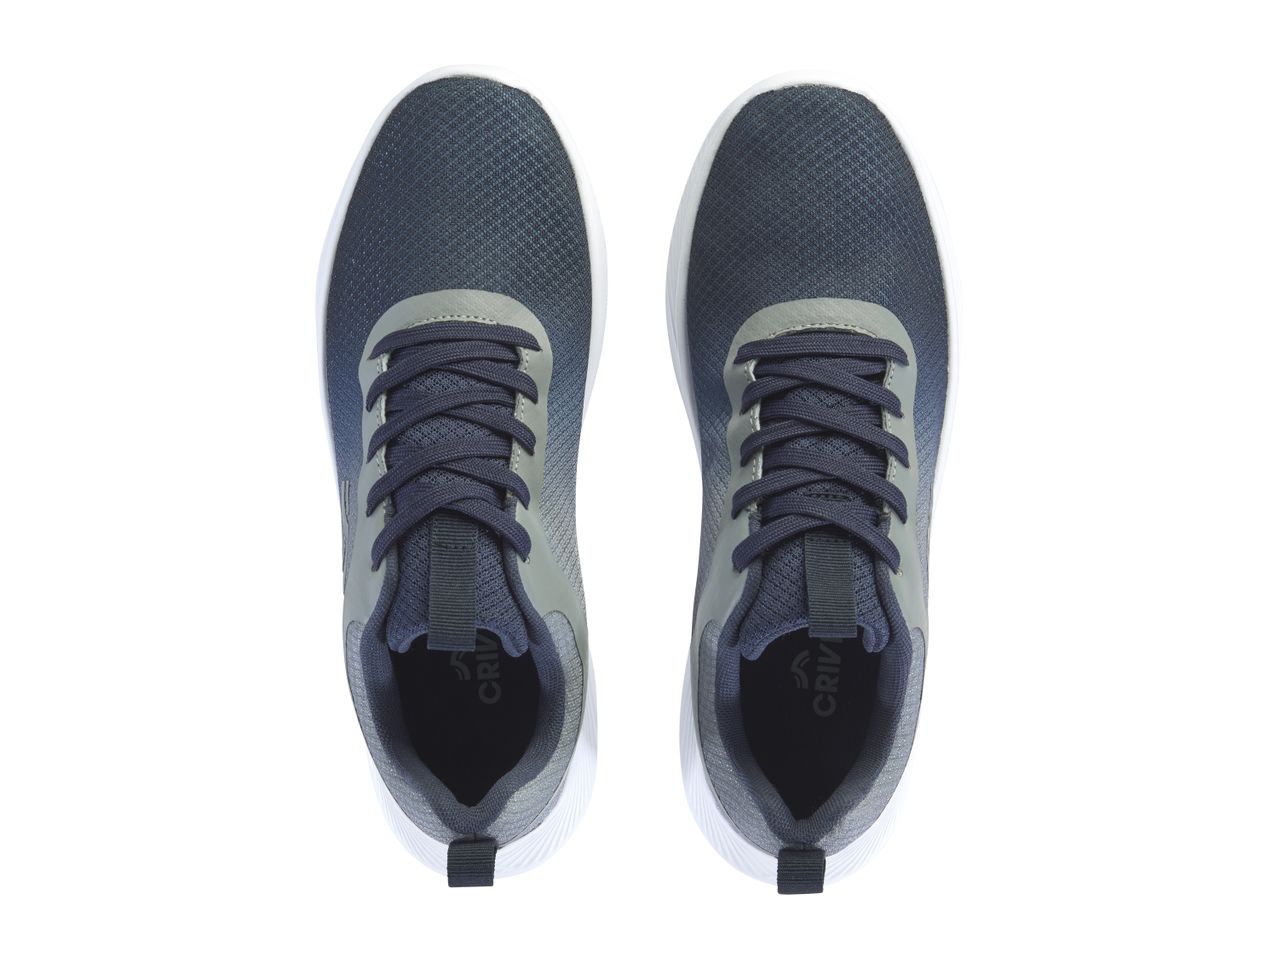 Go to full screen view: Crivit Men’s Trainers - Image 6